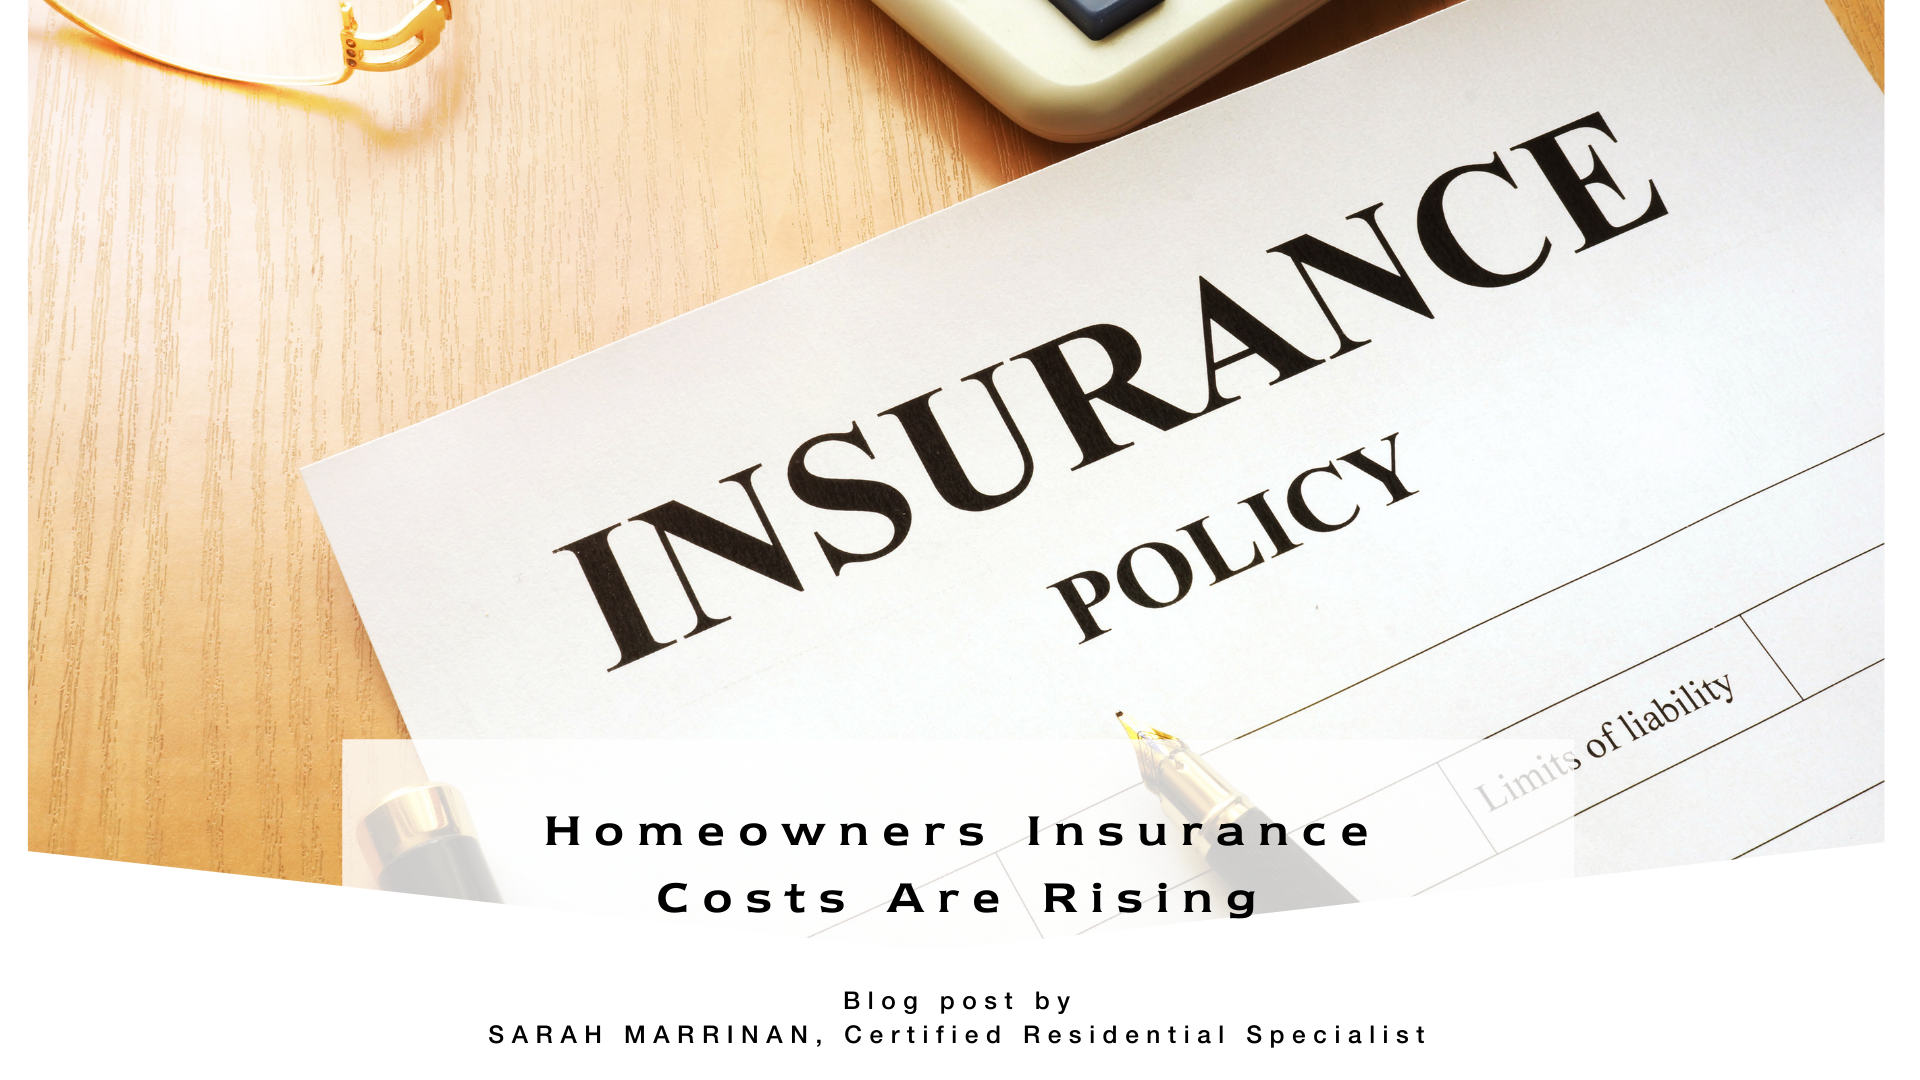 Homeowners Insurance Costs Are Rising